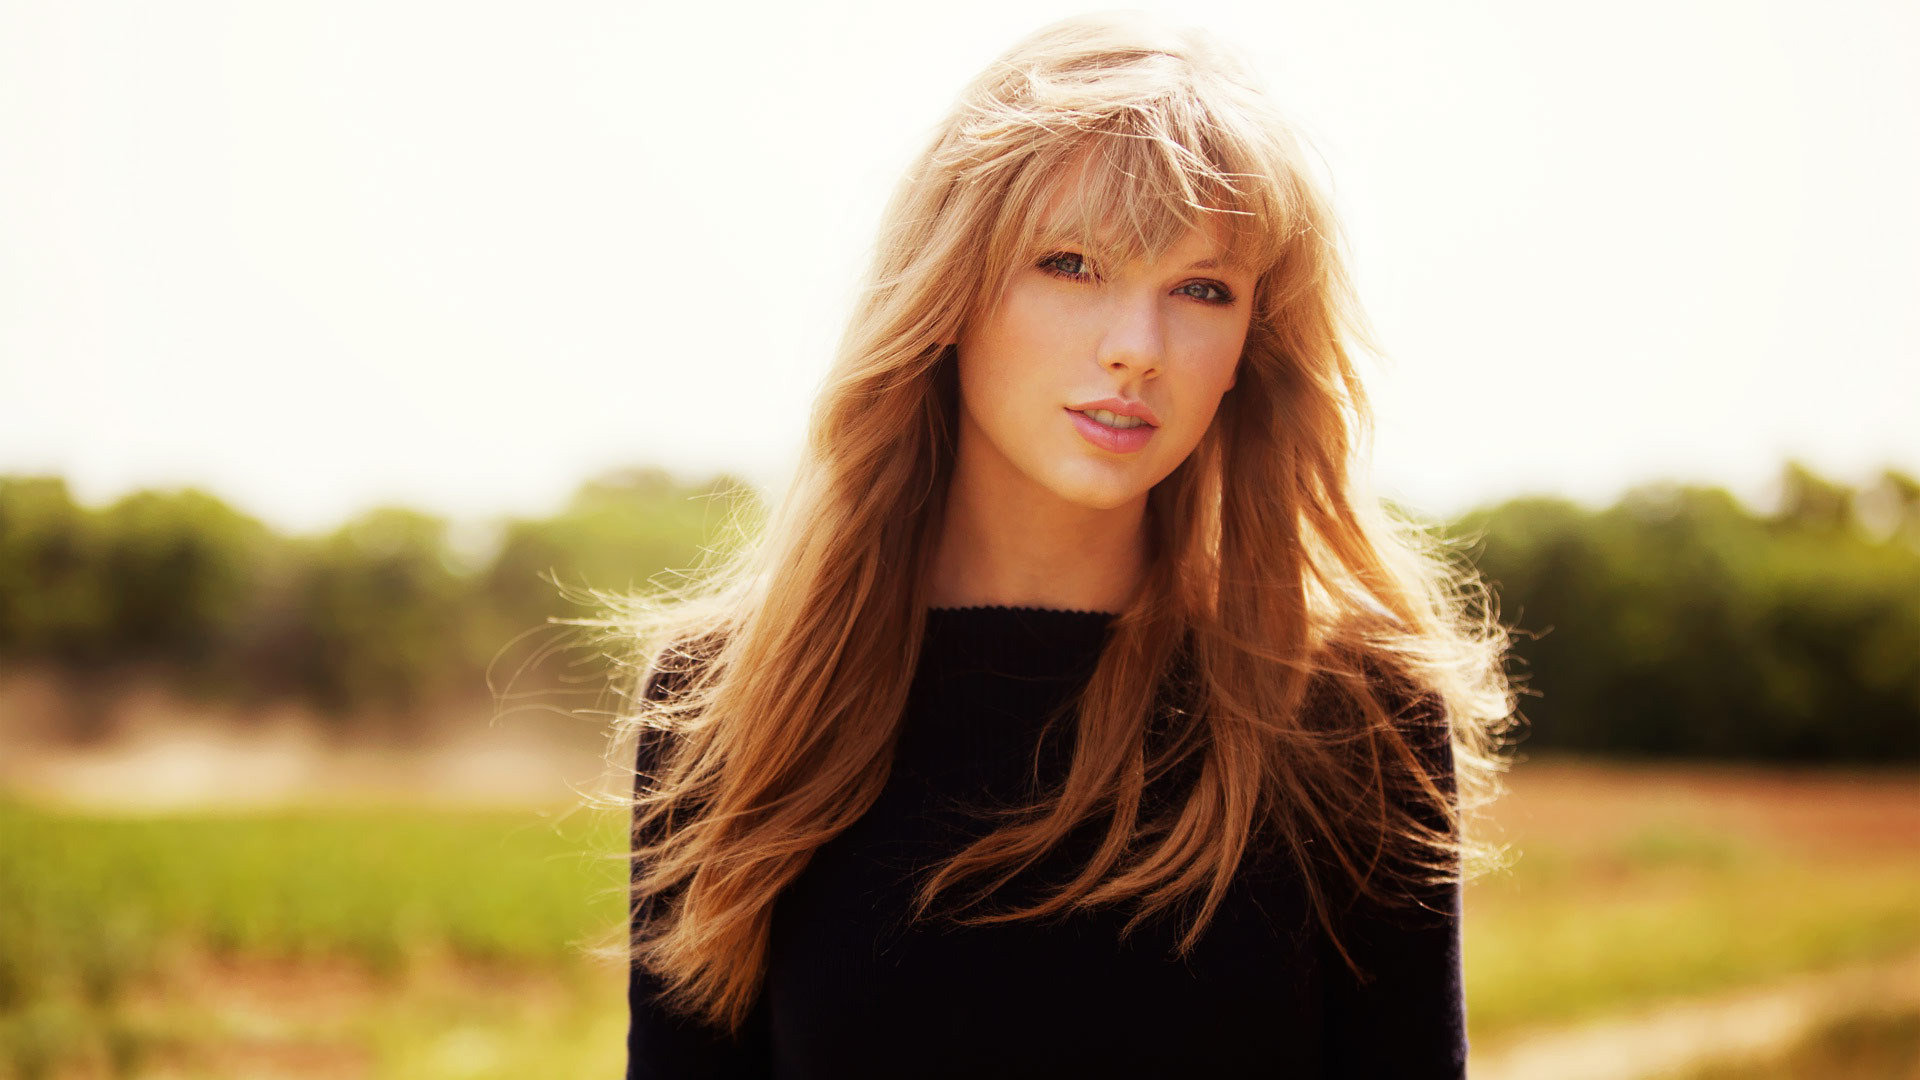 taylor swift wallpaper,hair,face,blond,hairstyle,beauty